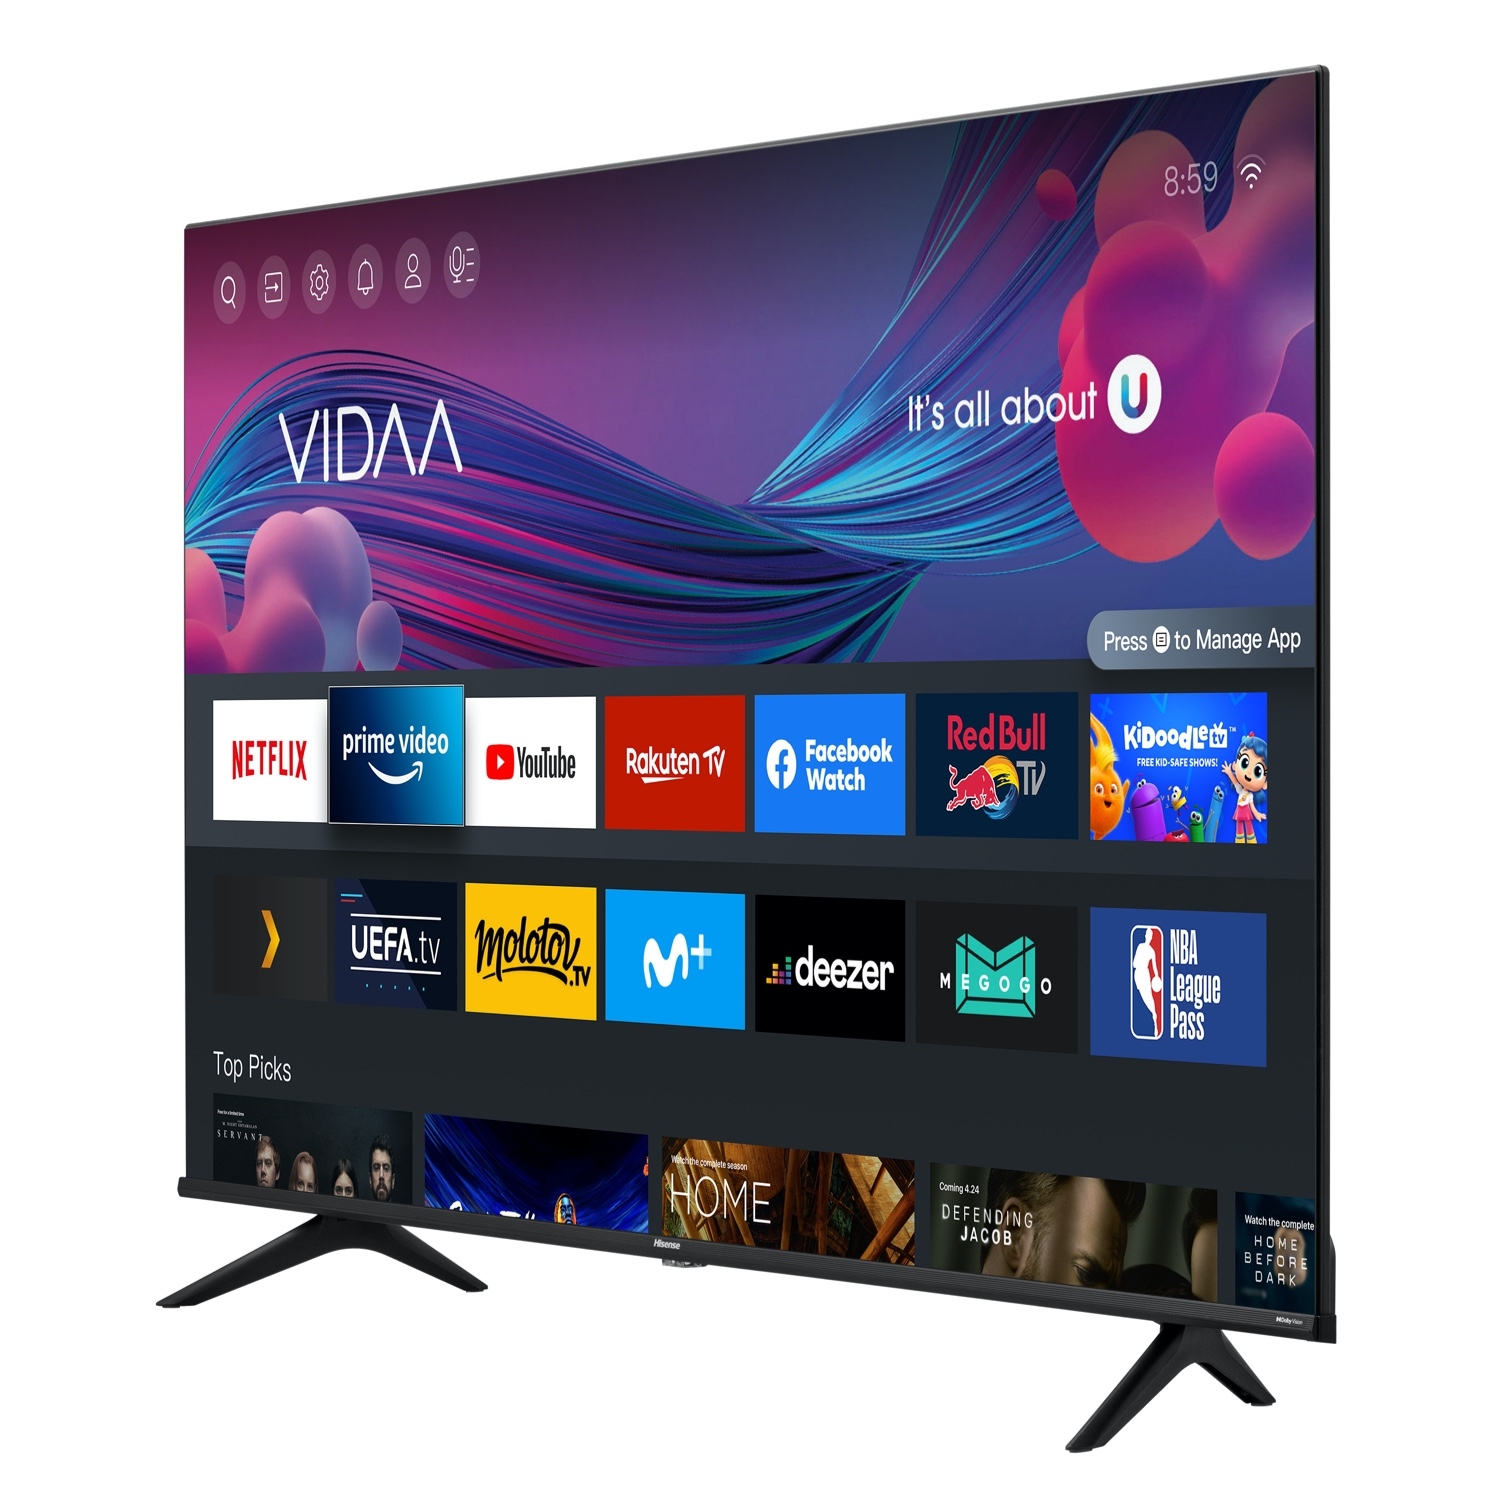 Hisense 50A6GTUK 50" 4K UHD HDR SMART TV with Alexa & Google Assistant and Dolby Vision - 3